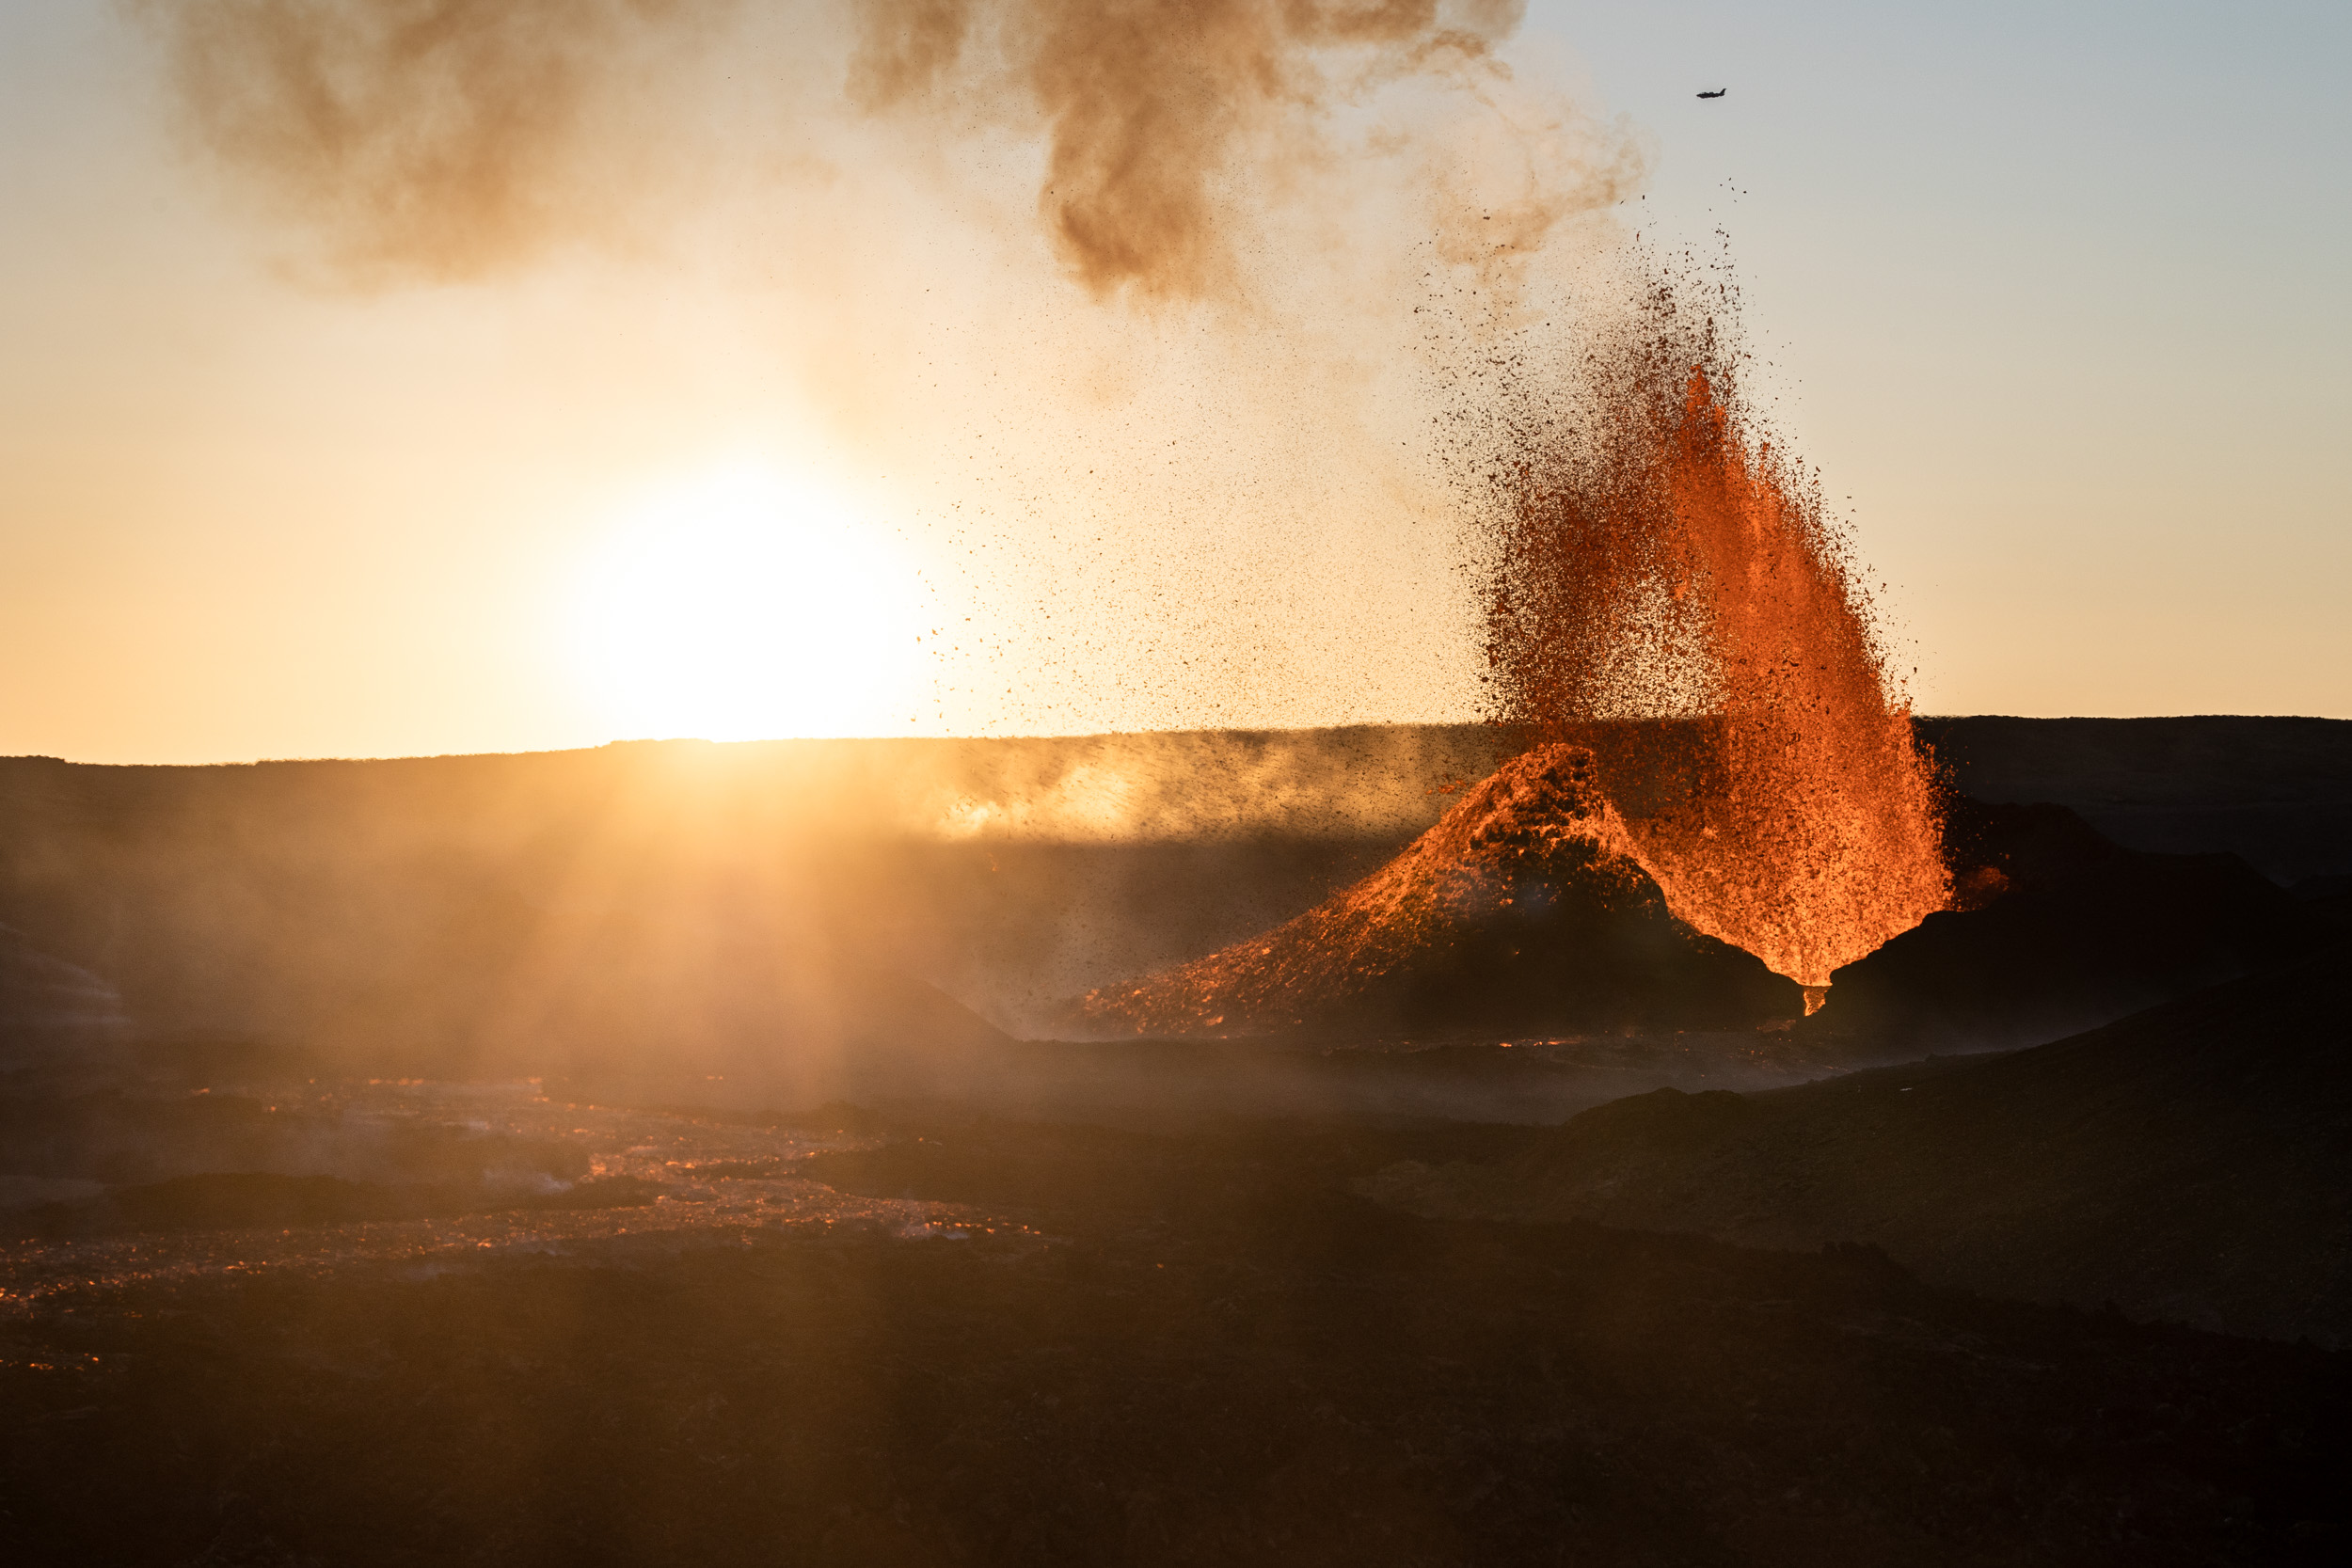 New on YouTube: Photographing a Volcanic Eruption